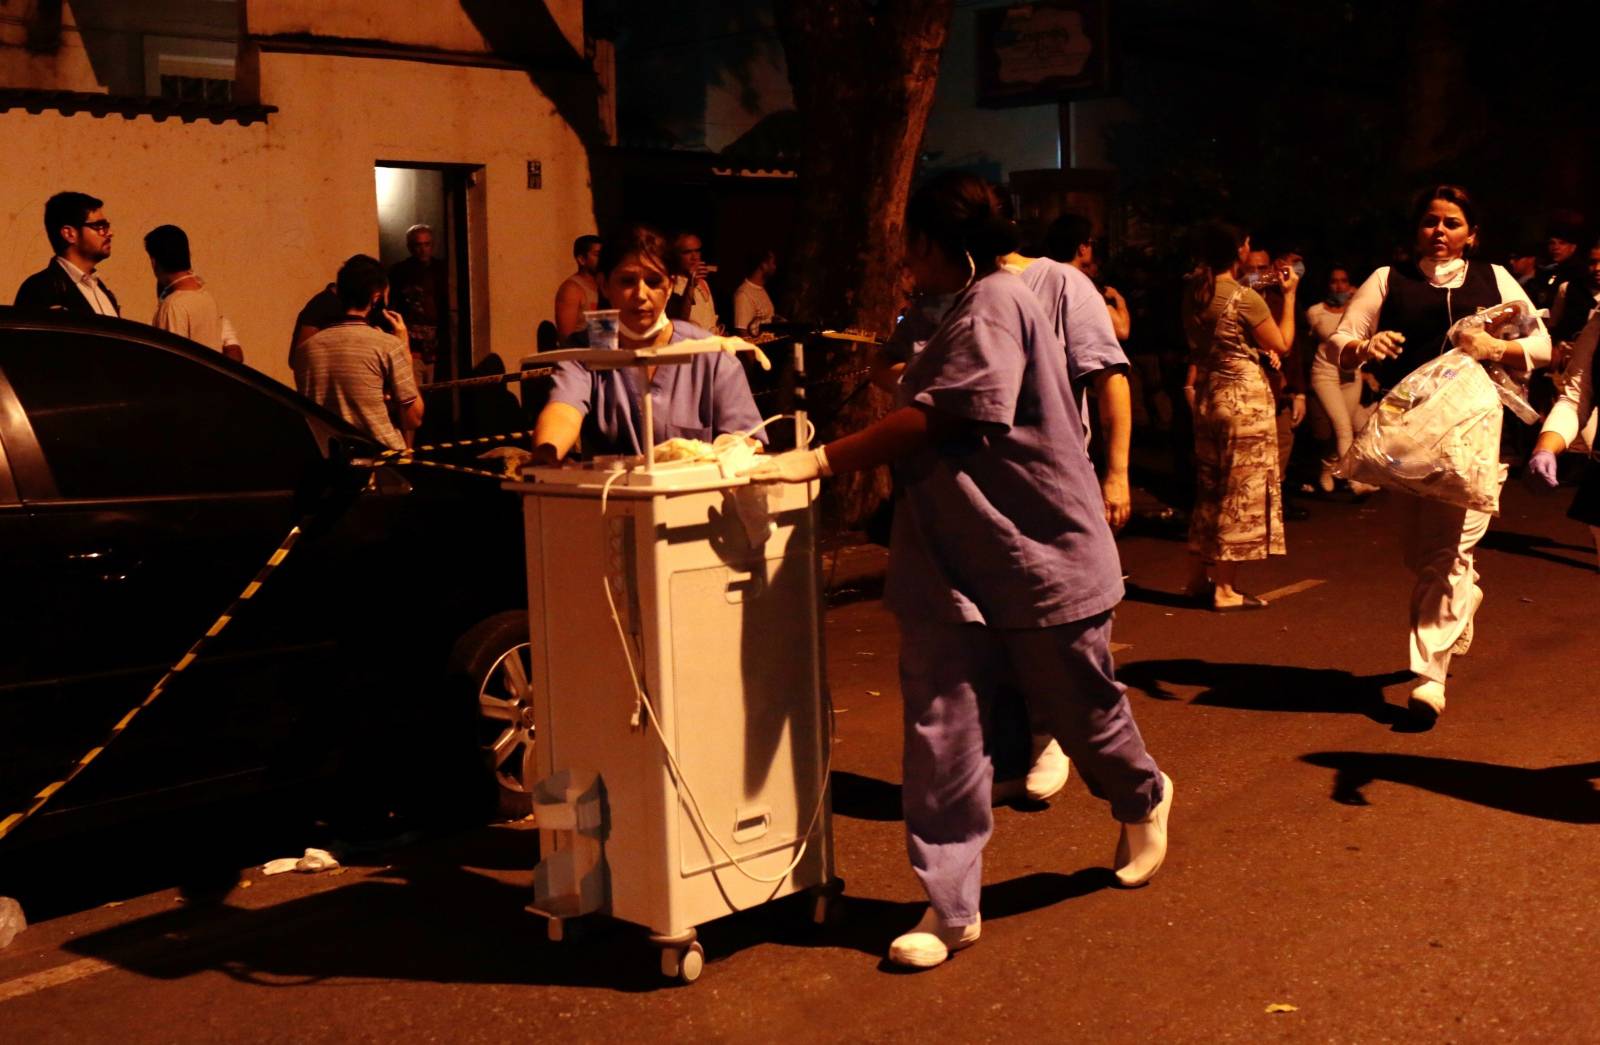 Employees move medical equipment after a fire hit the Badim Hospital in Rio de Janeiro,